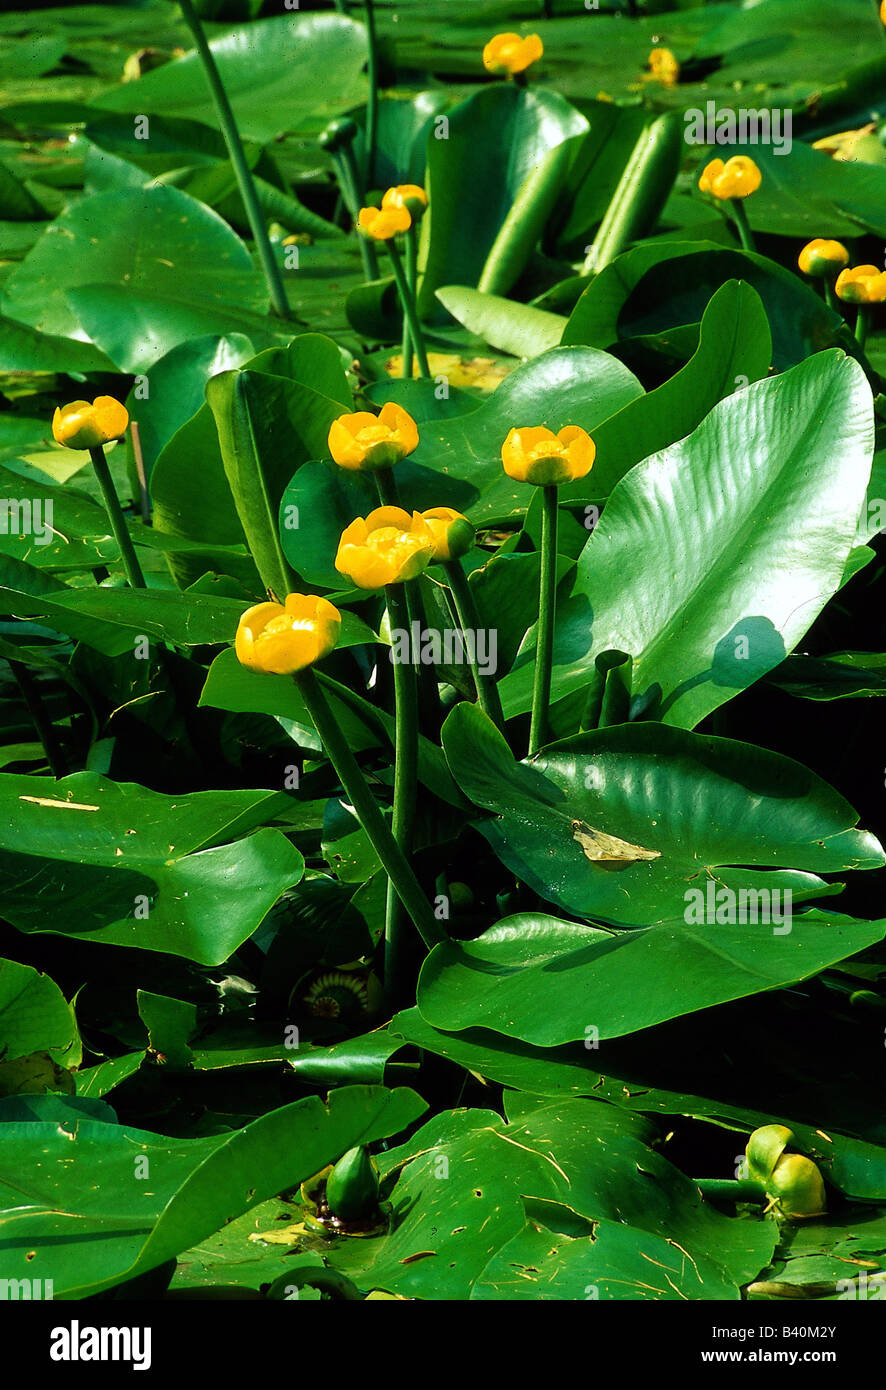 botany, Nuphar, species: "Yellow water-lily", (Nuphar lutea), blossoms, in water, Luteum, Nymphaeaceae, waterlily, spatterdock, Stock Photo